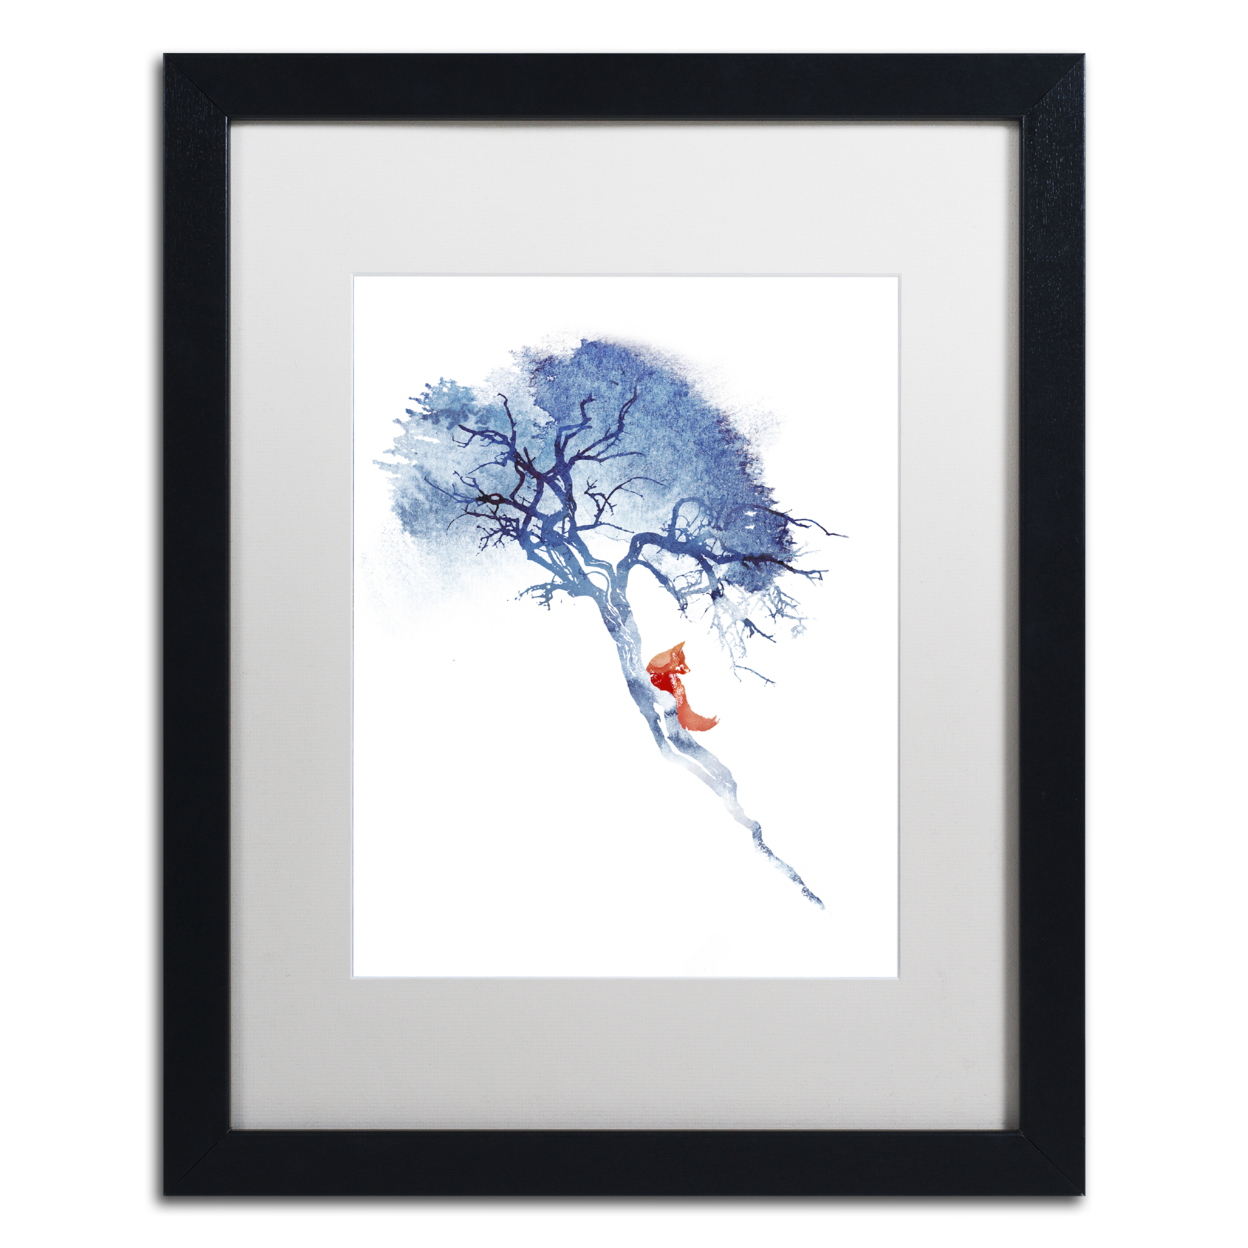 Robert Farkas 'There's No Way Back' Black Wooden Framed Art 18 X 22 Inches